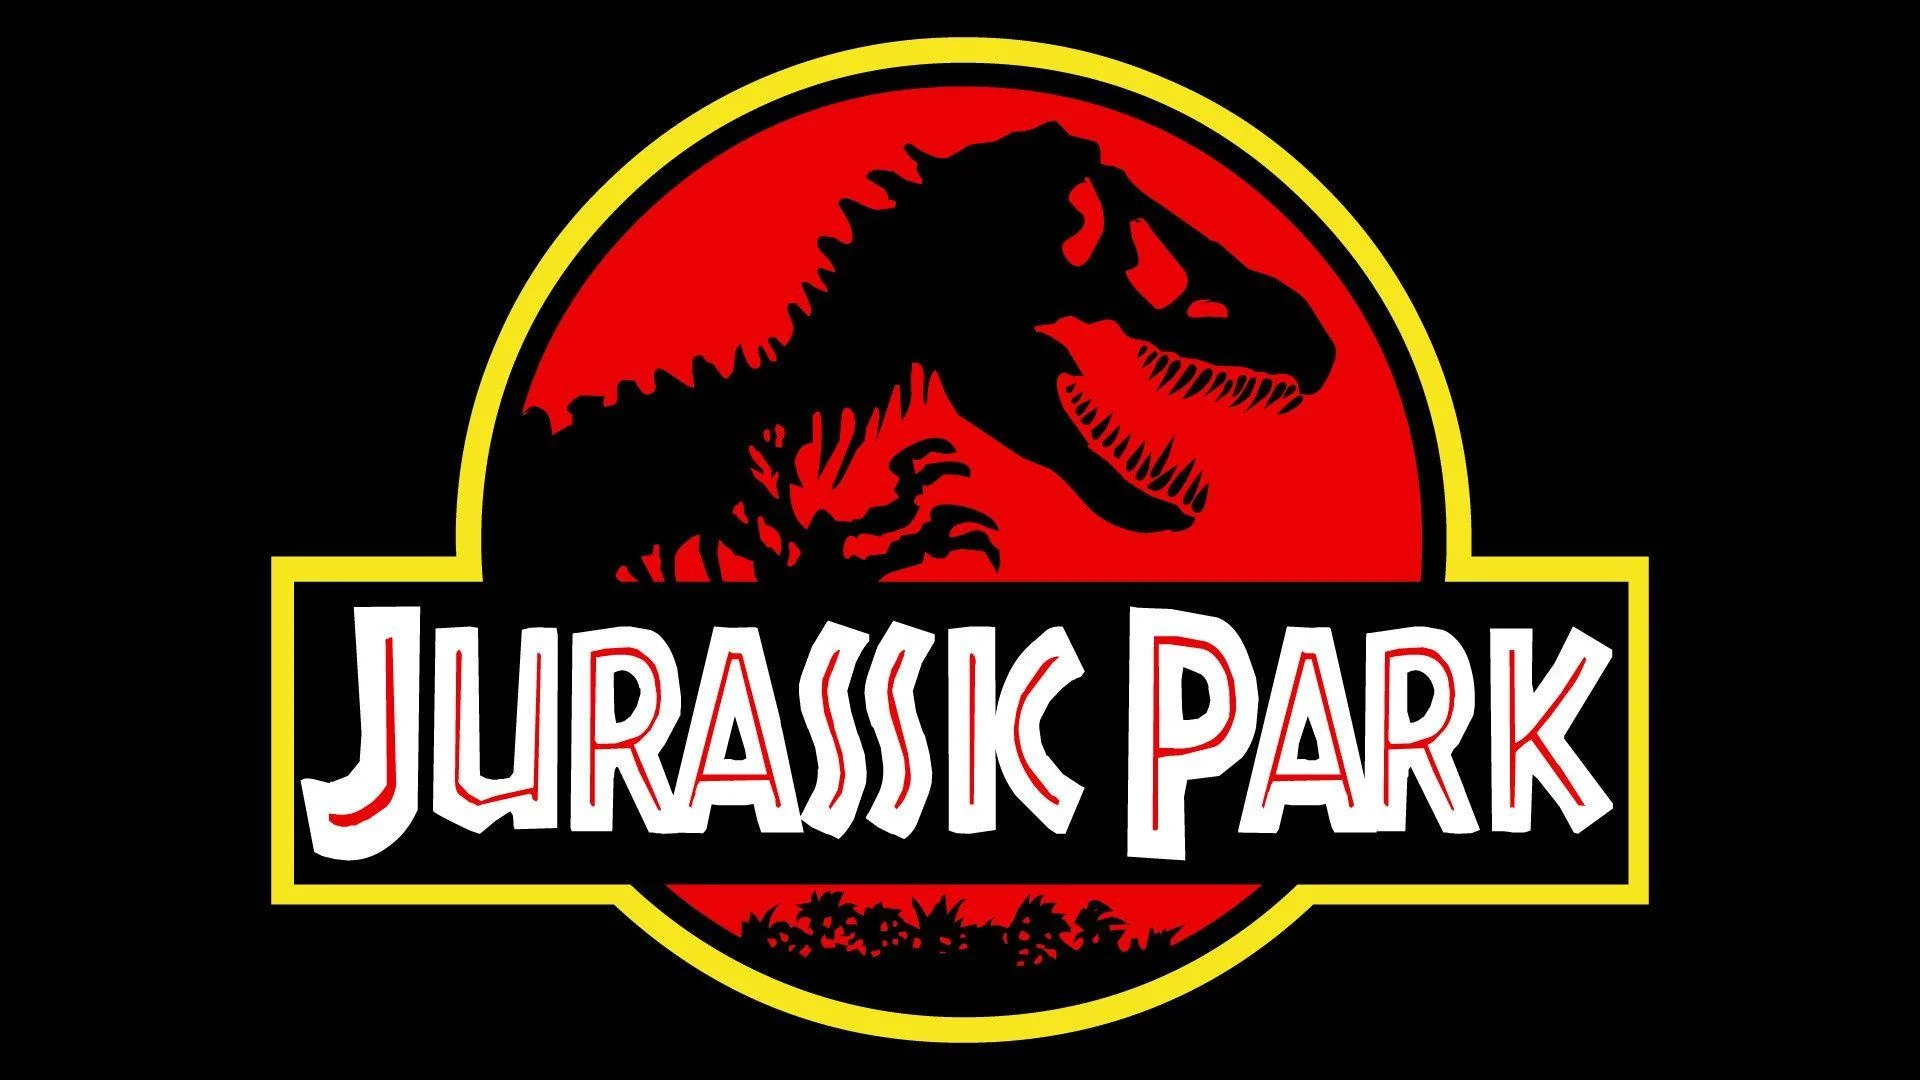 LEGO unveils five new Jurassic Park 30th Anniversary sets for June 2023! -  Jay's Brick Blog